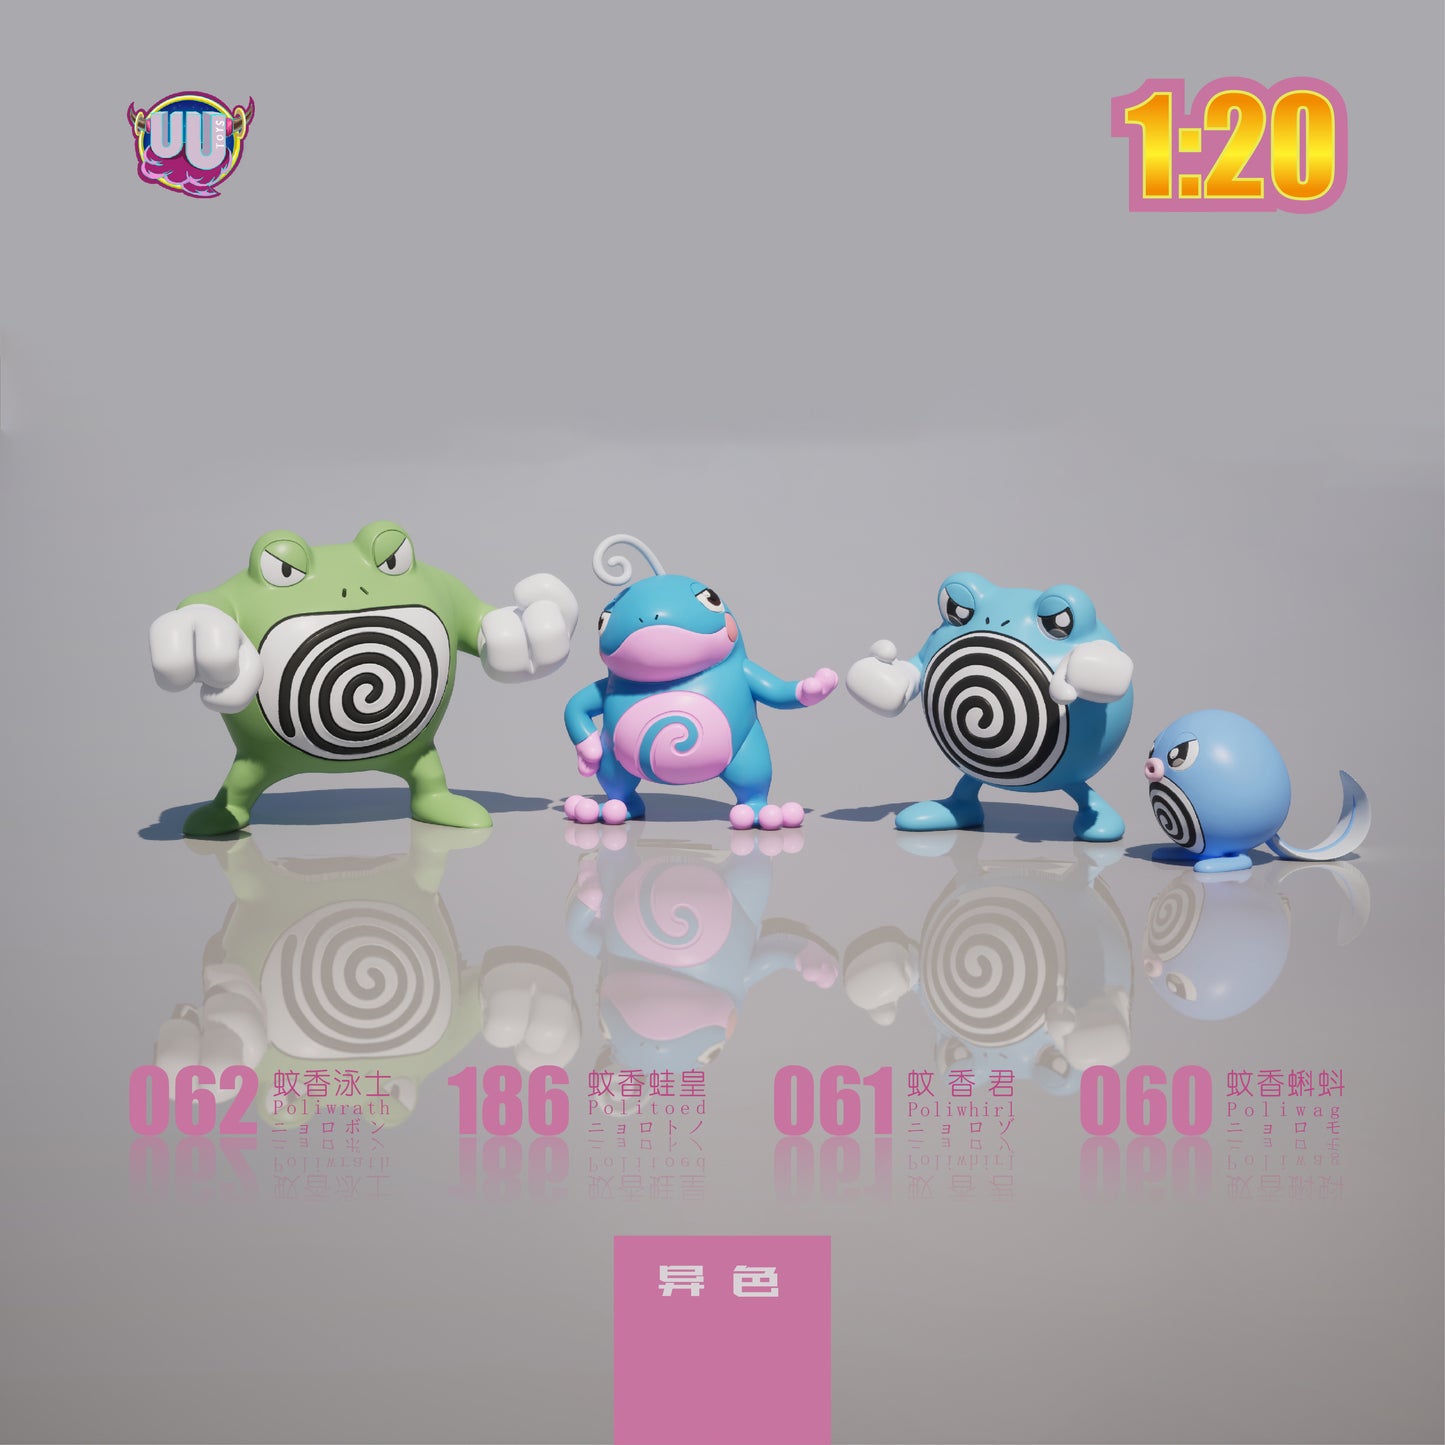 〖 Sold Out〗Pokemon Scale World Poliwag Poliwhirl Poliwrath Politoed #060 #061 #062 #186 1:20 - UU Studio